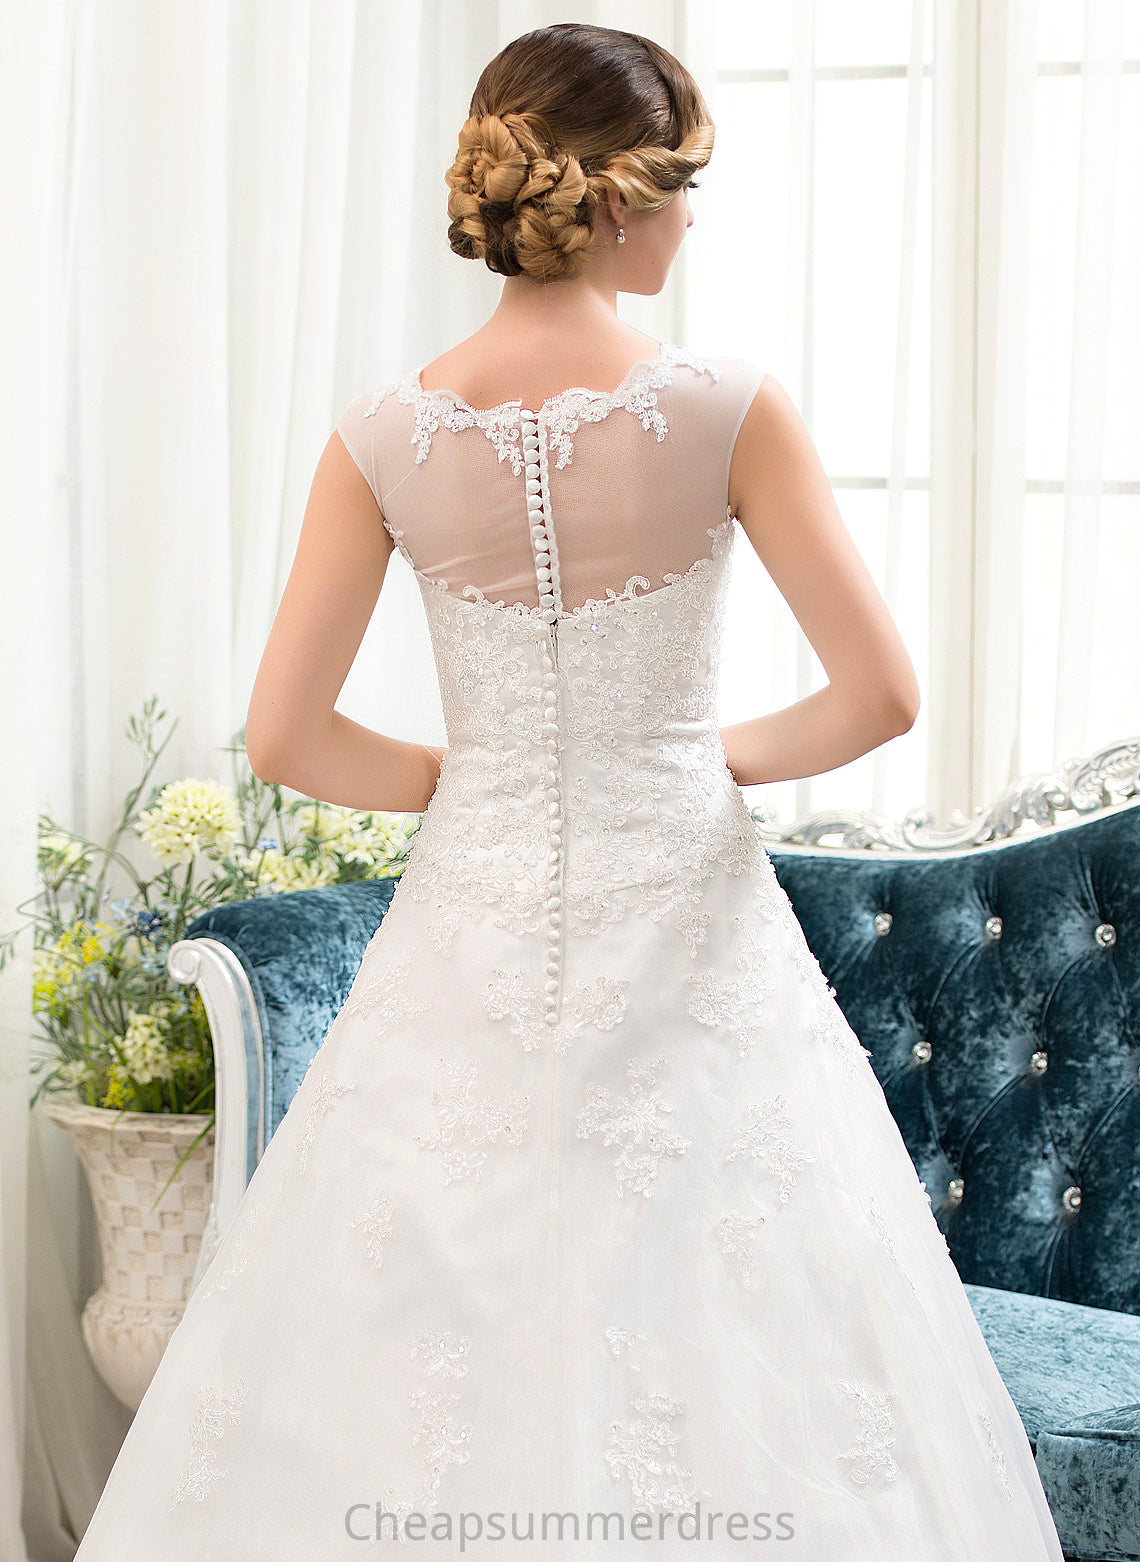 With Wedding Dresses Wedding Sequins Ball-Gown/Princess Dress Beading Deja Organza Sweep Tulle Train Illusion